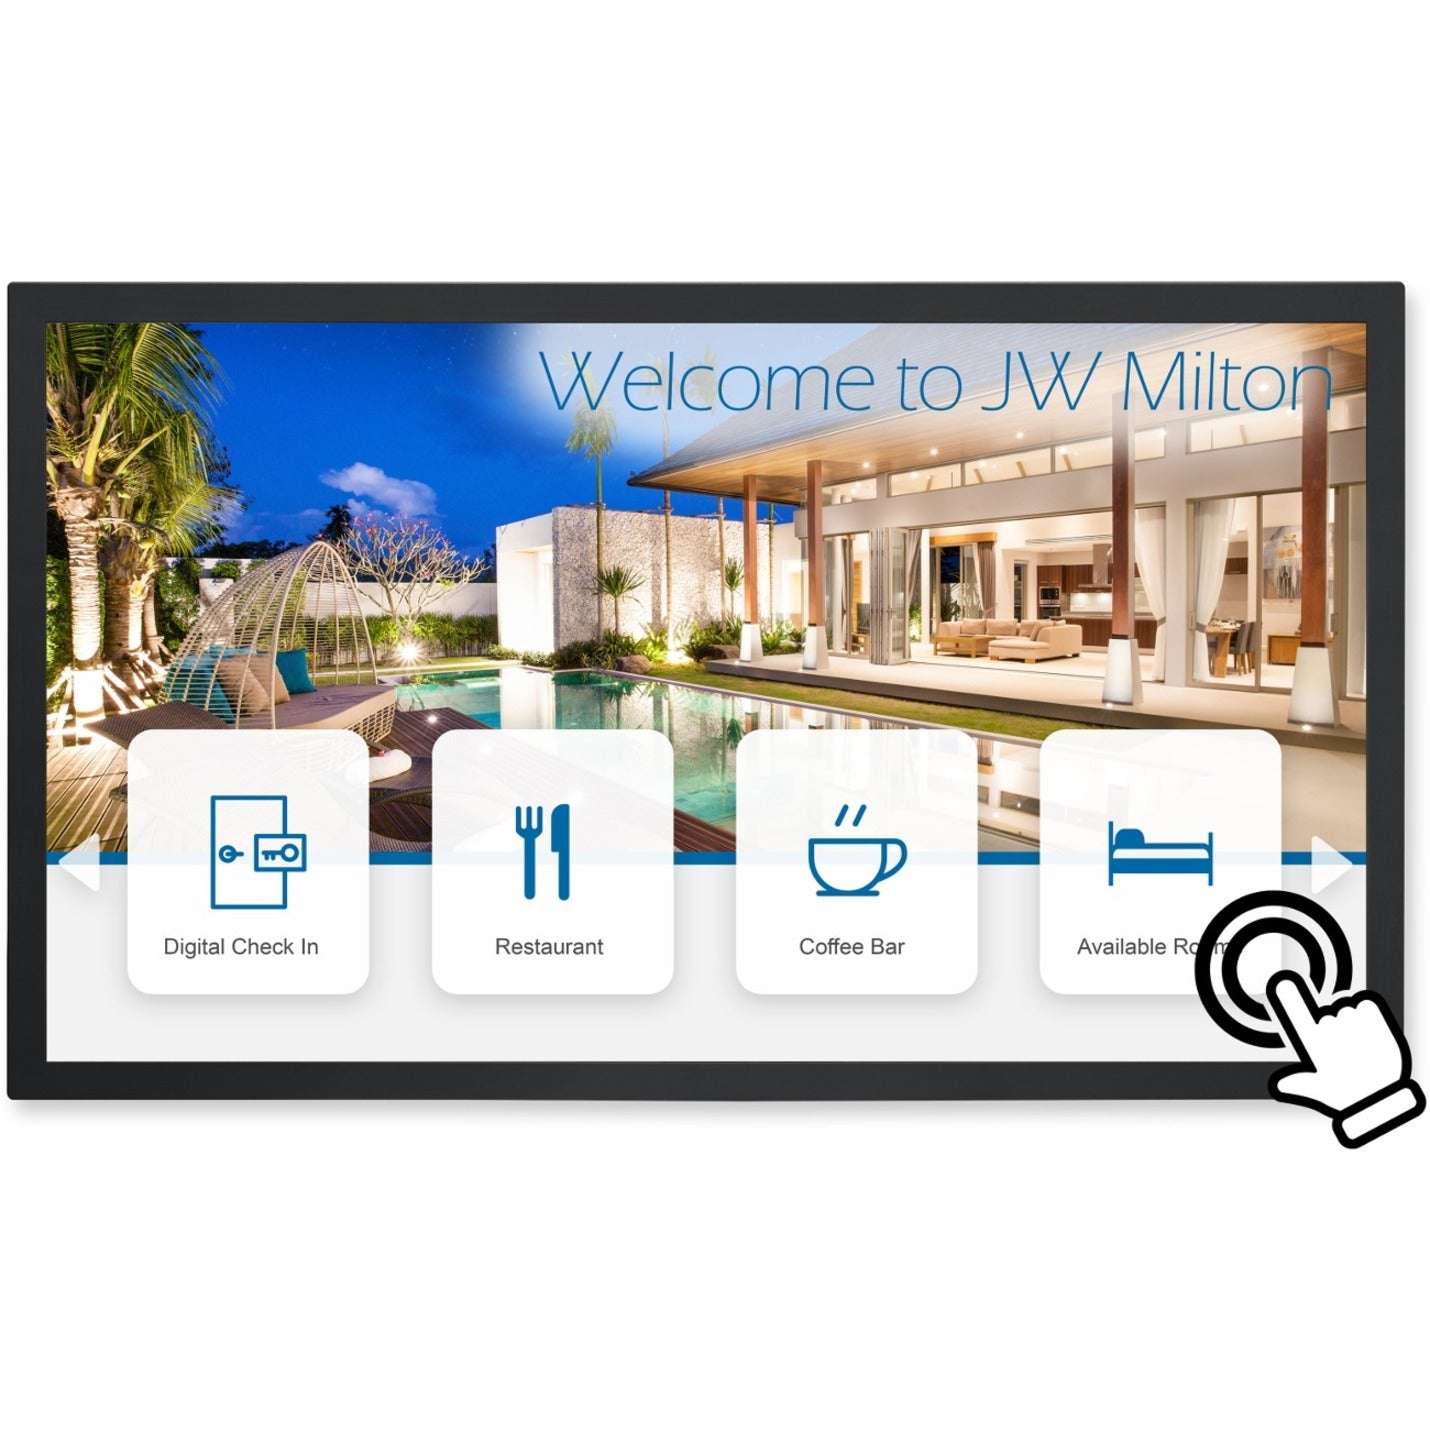 Sharp NEC Display M431-IR 43" Ultra High Definition Professional Display with Pre-installed IR Touch, 10-Point, 500 Nit, 8-bit+FRC, 2160p, 3 Year Warranty